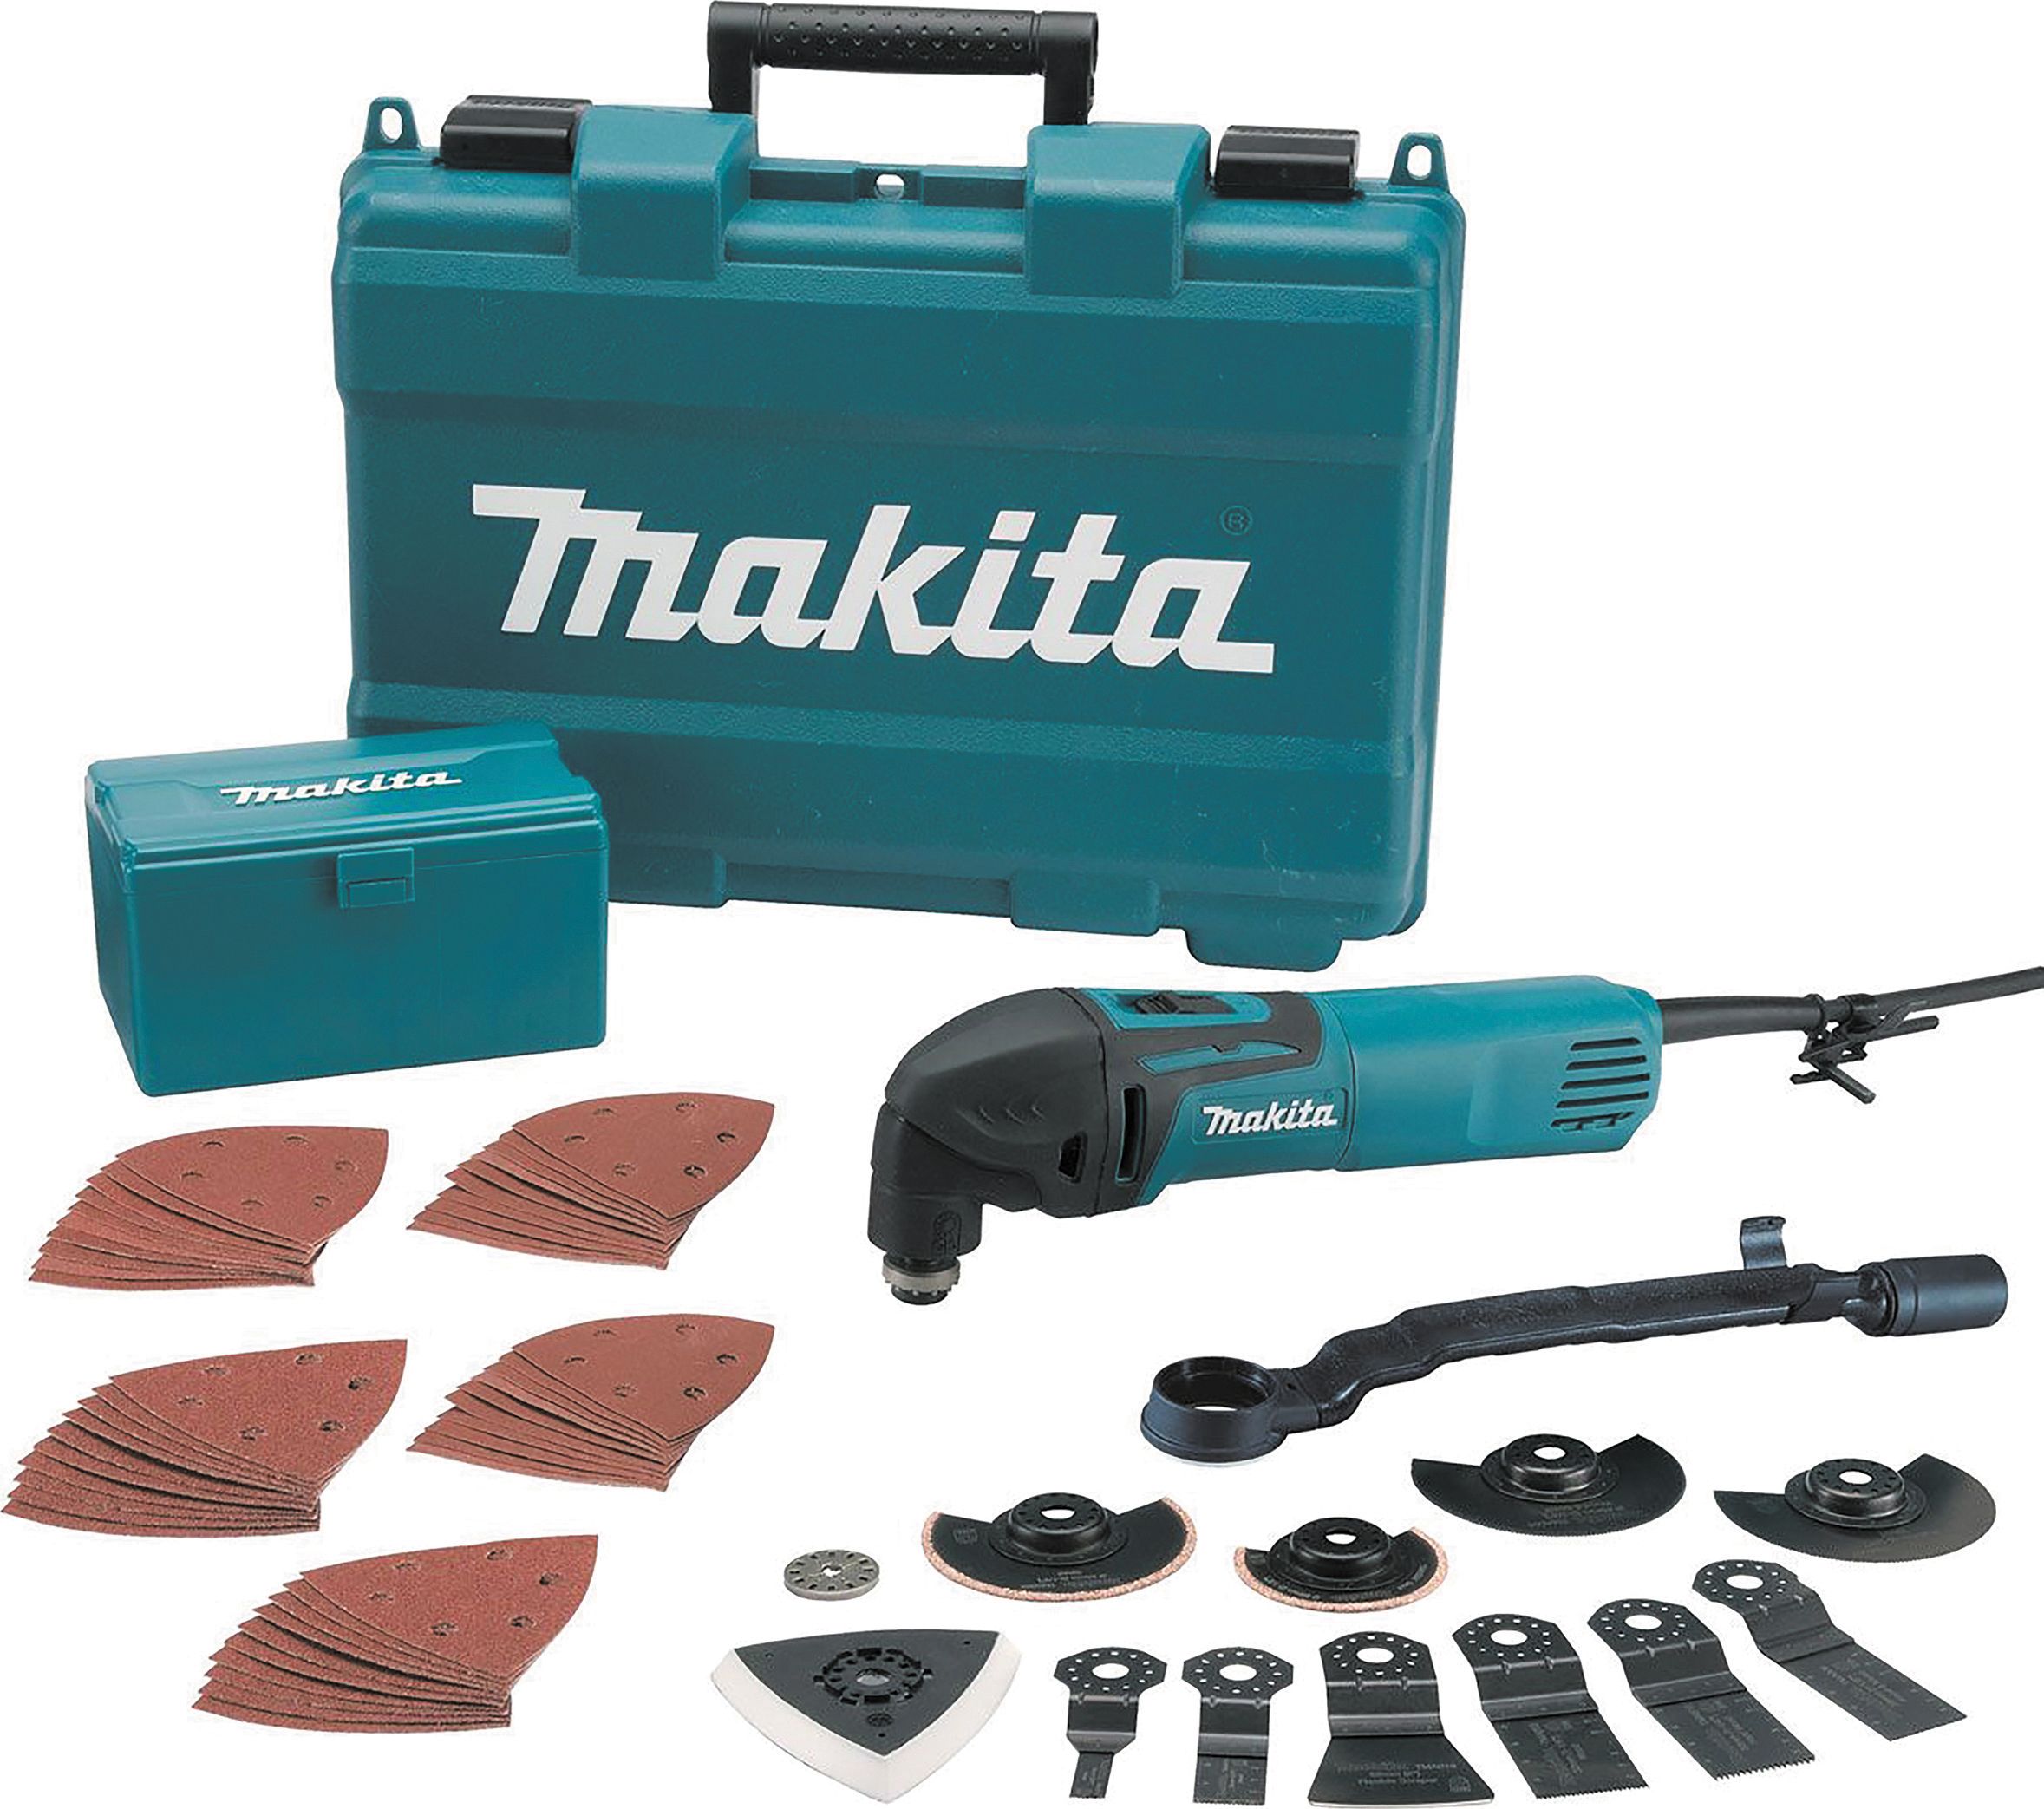 Makita TM3000CX4/1 Multi-Tool Kit With Accessories  Case 110V/320W – Excel  Tools